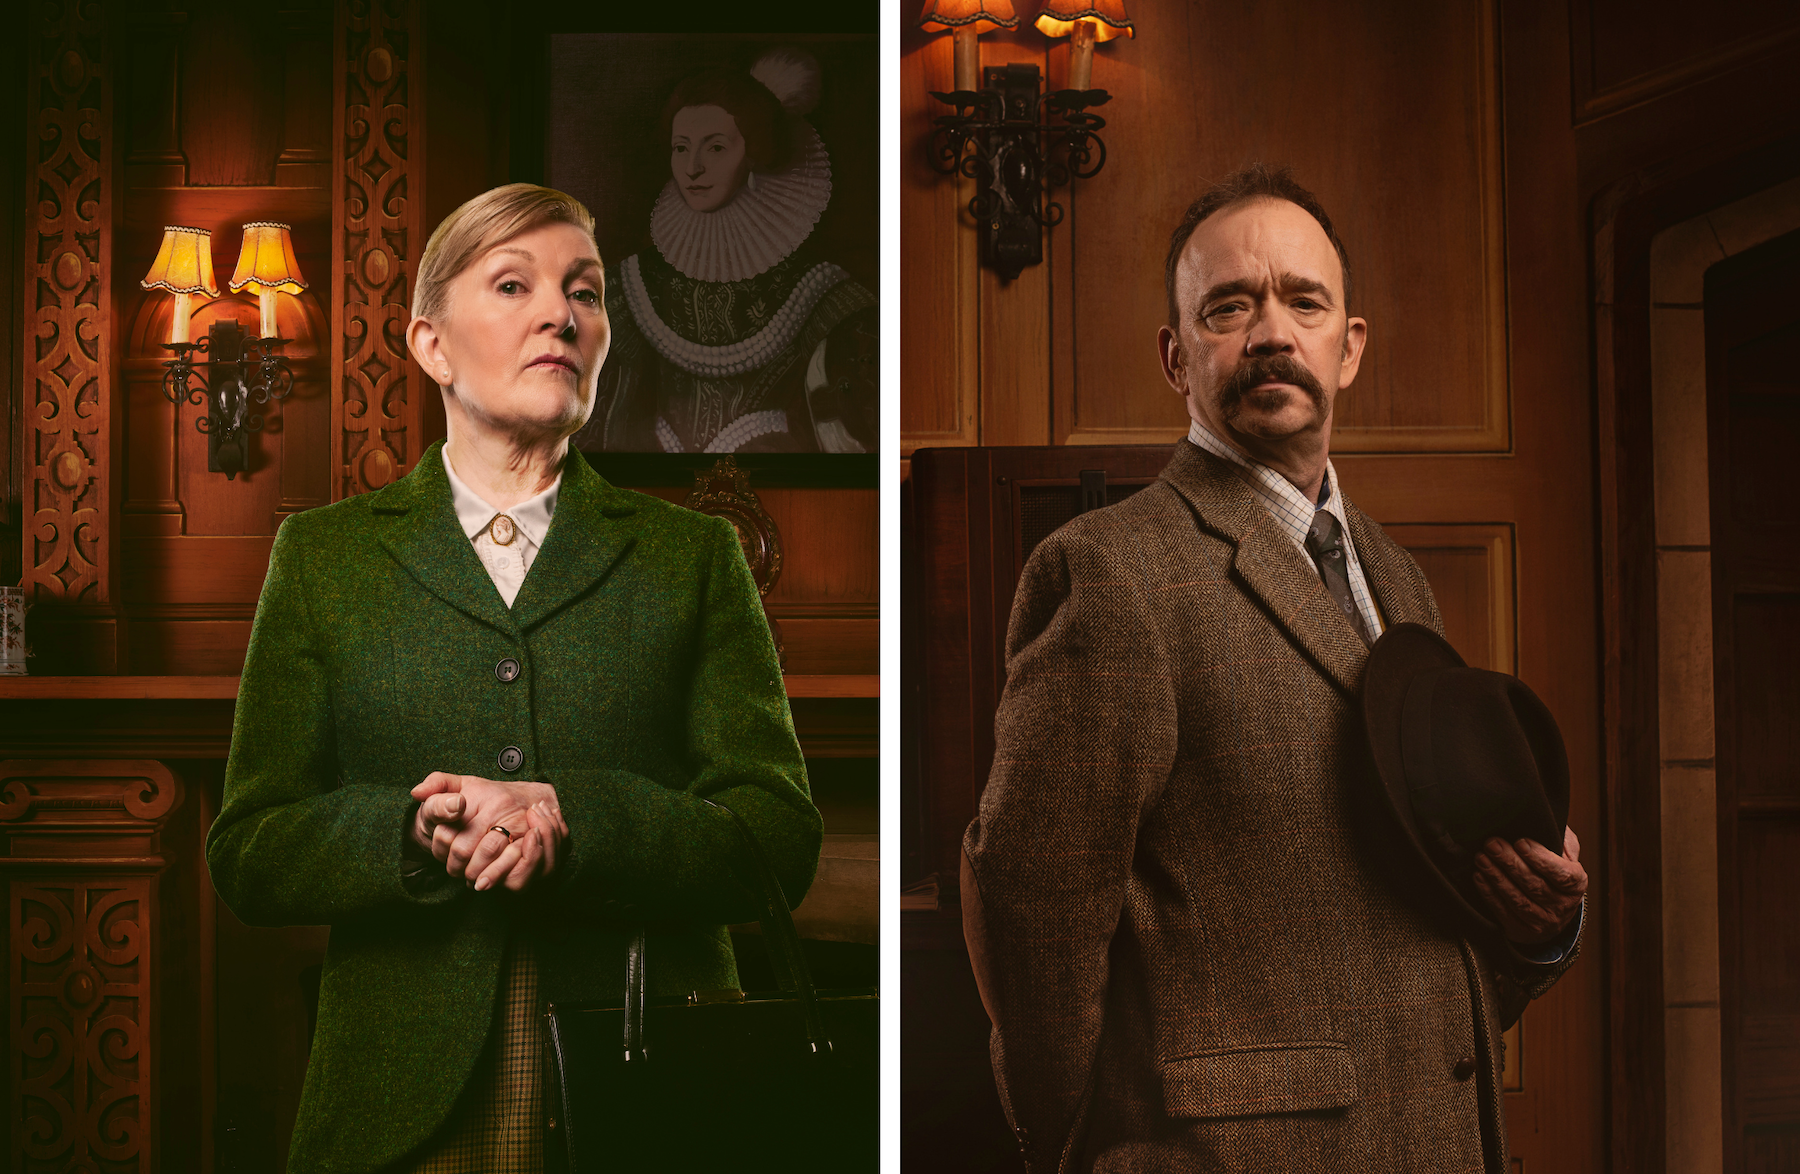 The Mousetrap at Buxton Opera House